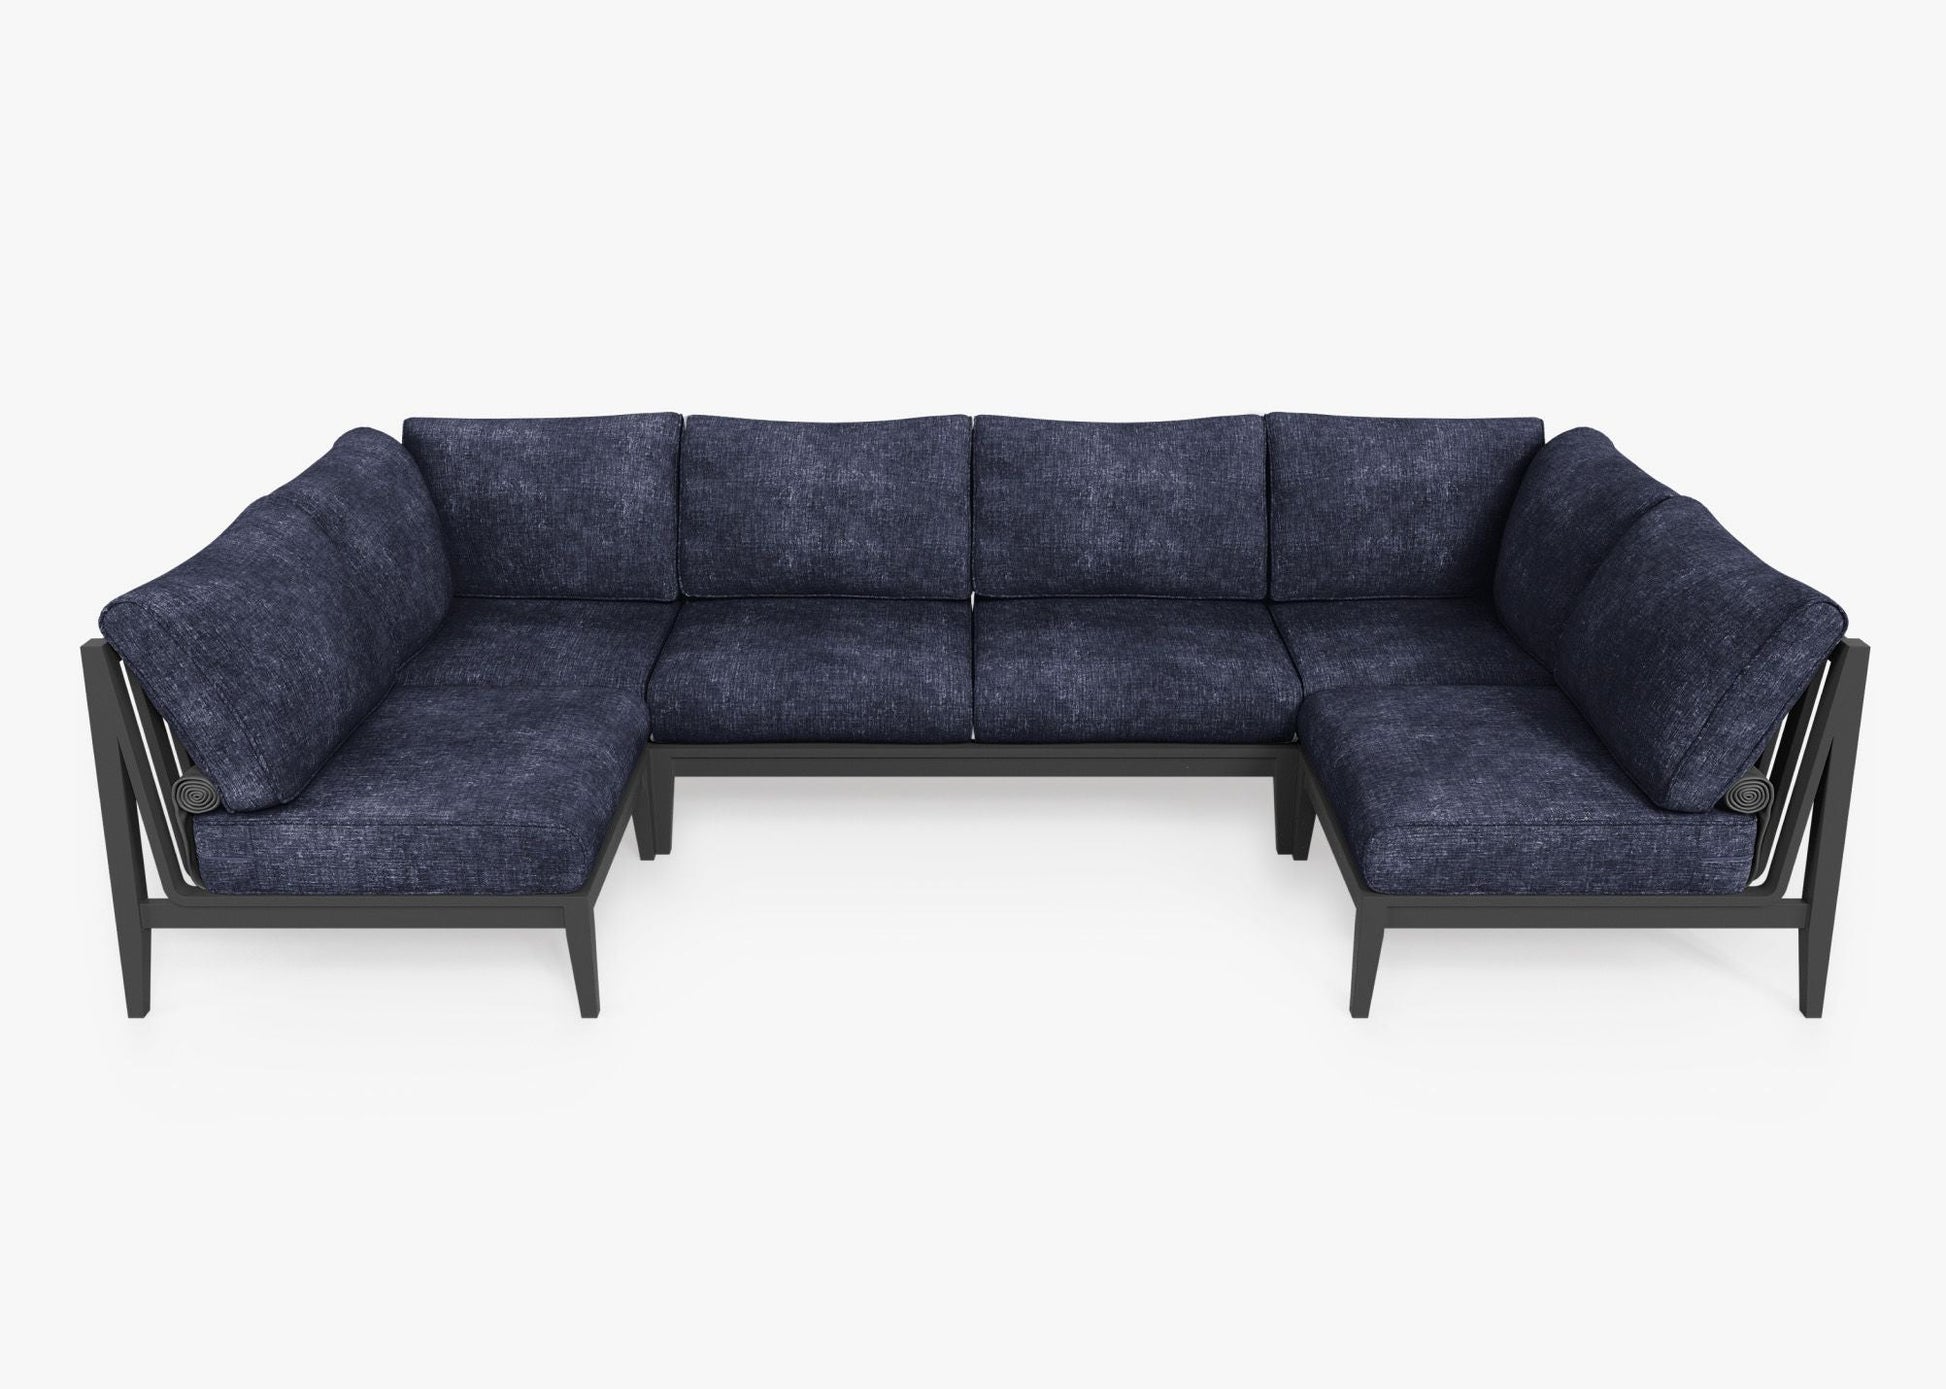 Live Outer 127" x 64" Charcoal Aluminum Outdoor U Sectional 6-Seat With Deep Sea Navy Cushion